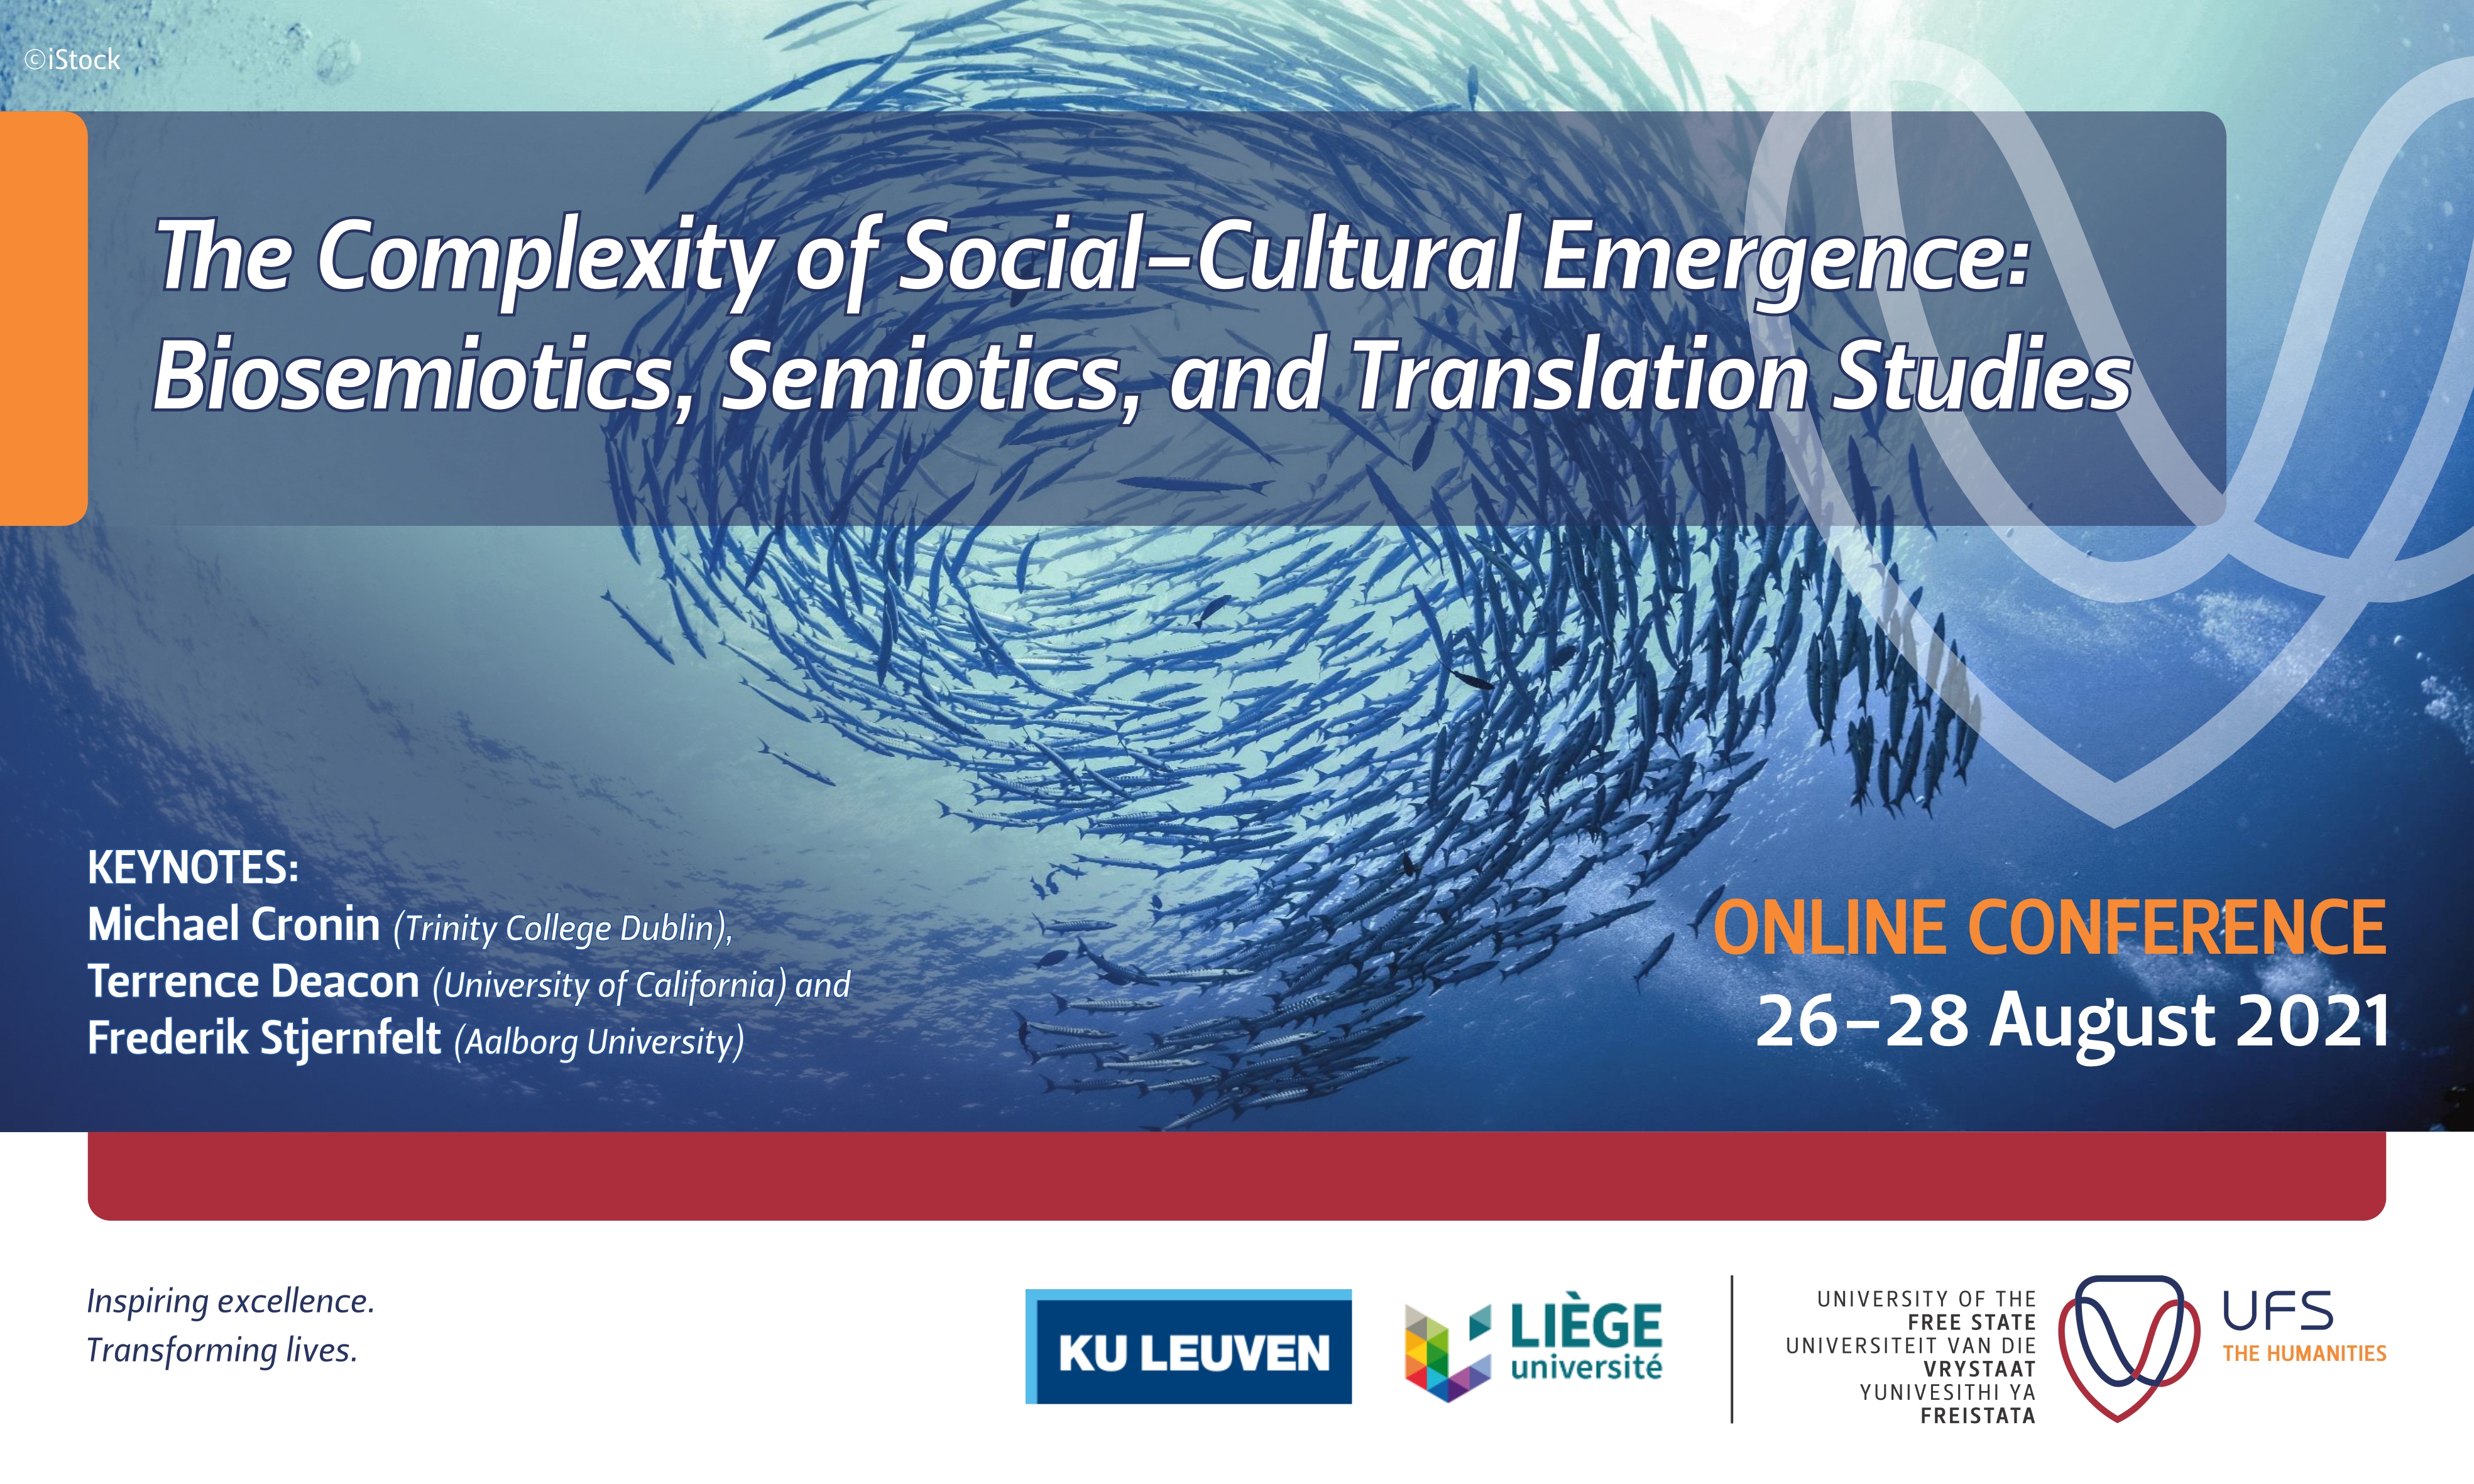 online-conference-the-complexity-of-social-cultural-emergence